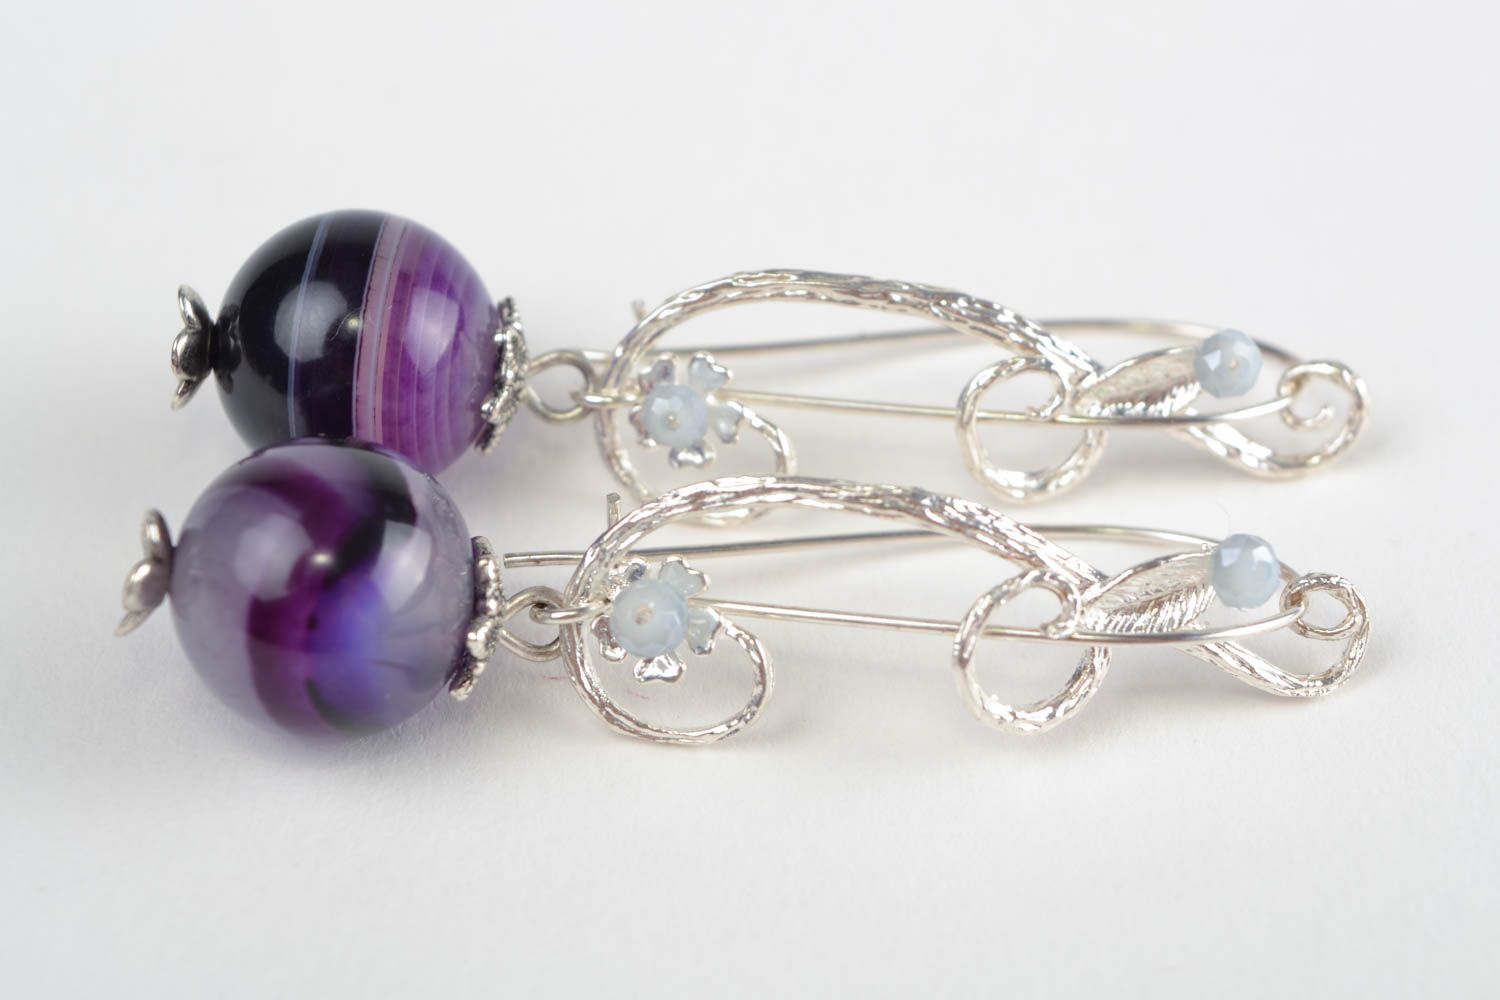 Handmade dangling earrings with silver colored basis and violet agate beads photo 2